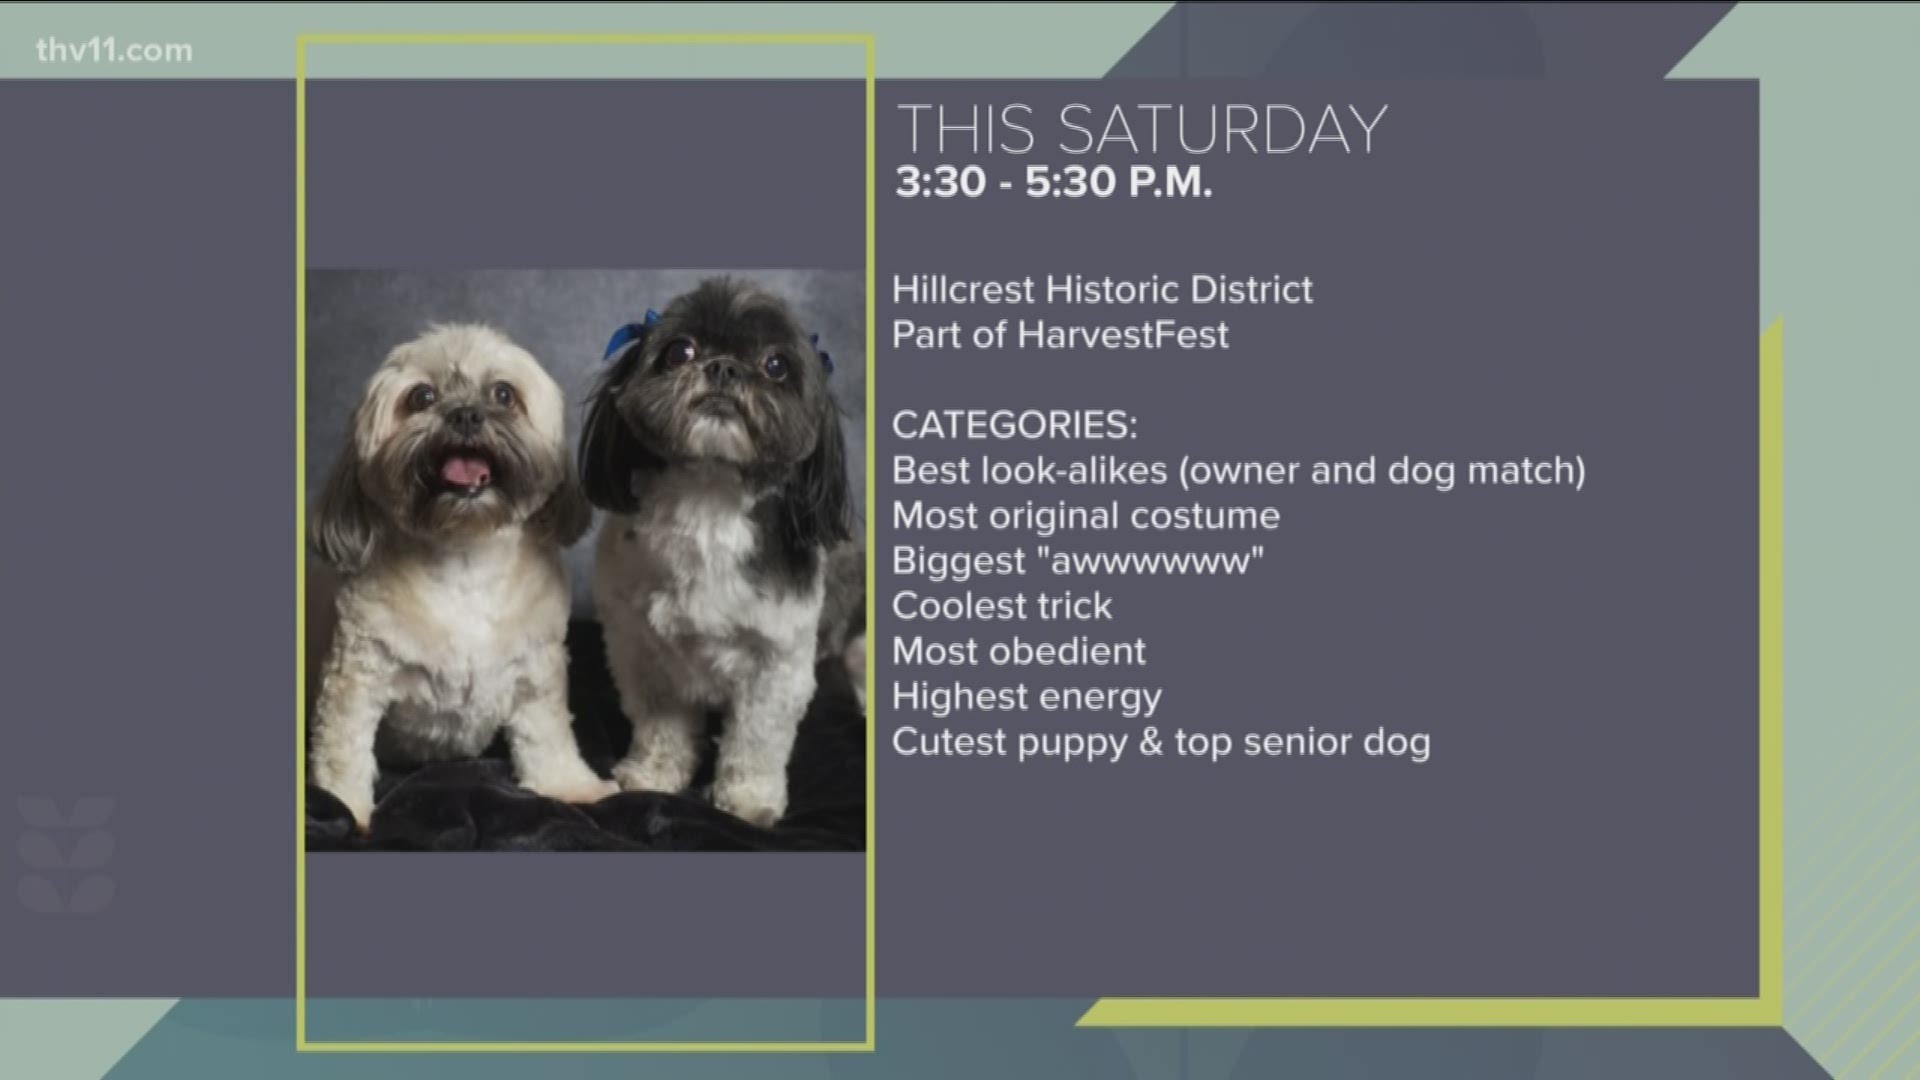 2nd Annual HarvestFest Dog Show will be Saturday, October 12th in the Hillcrest Historic District at 3:30 p.m.